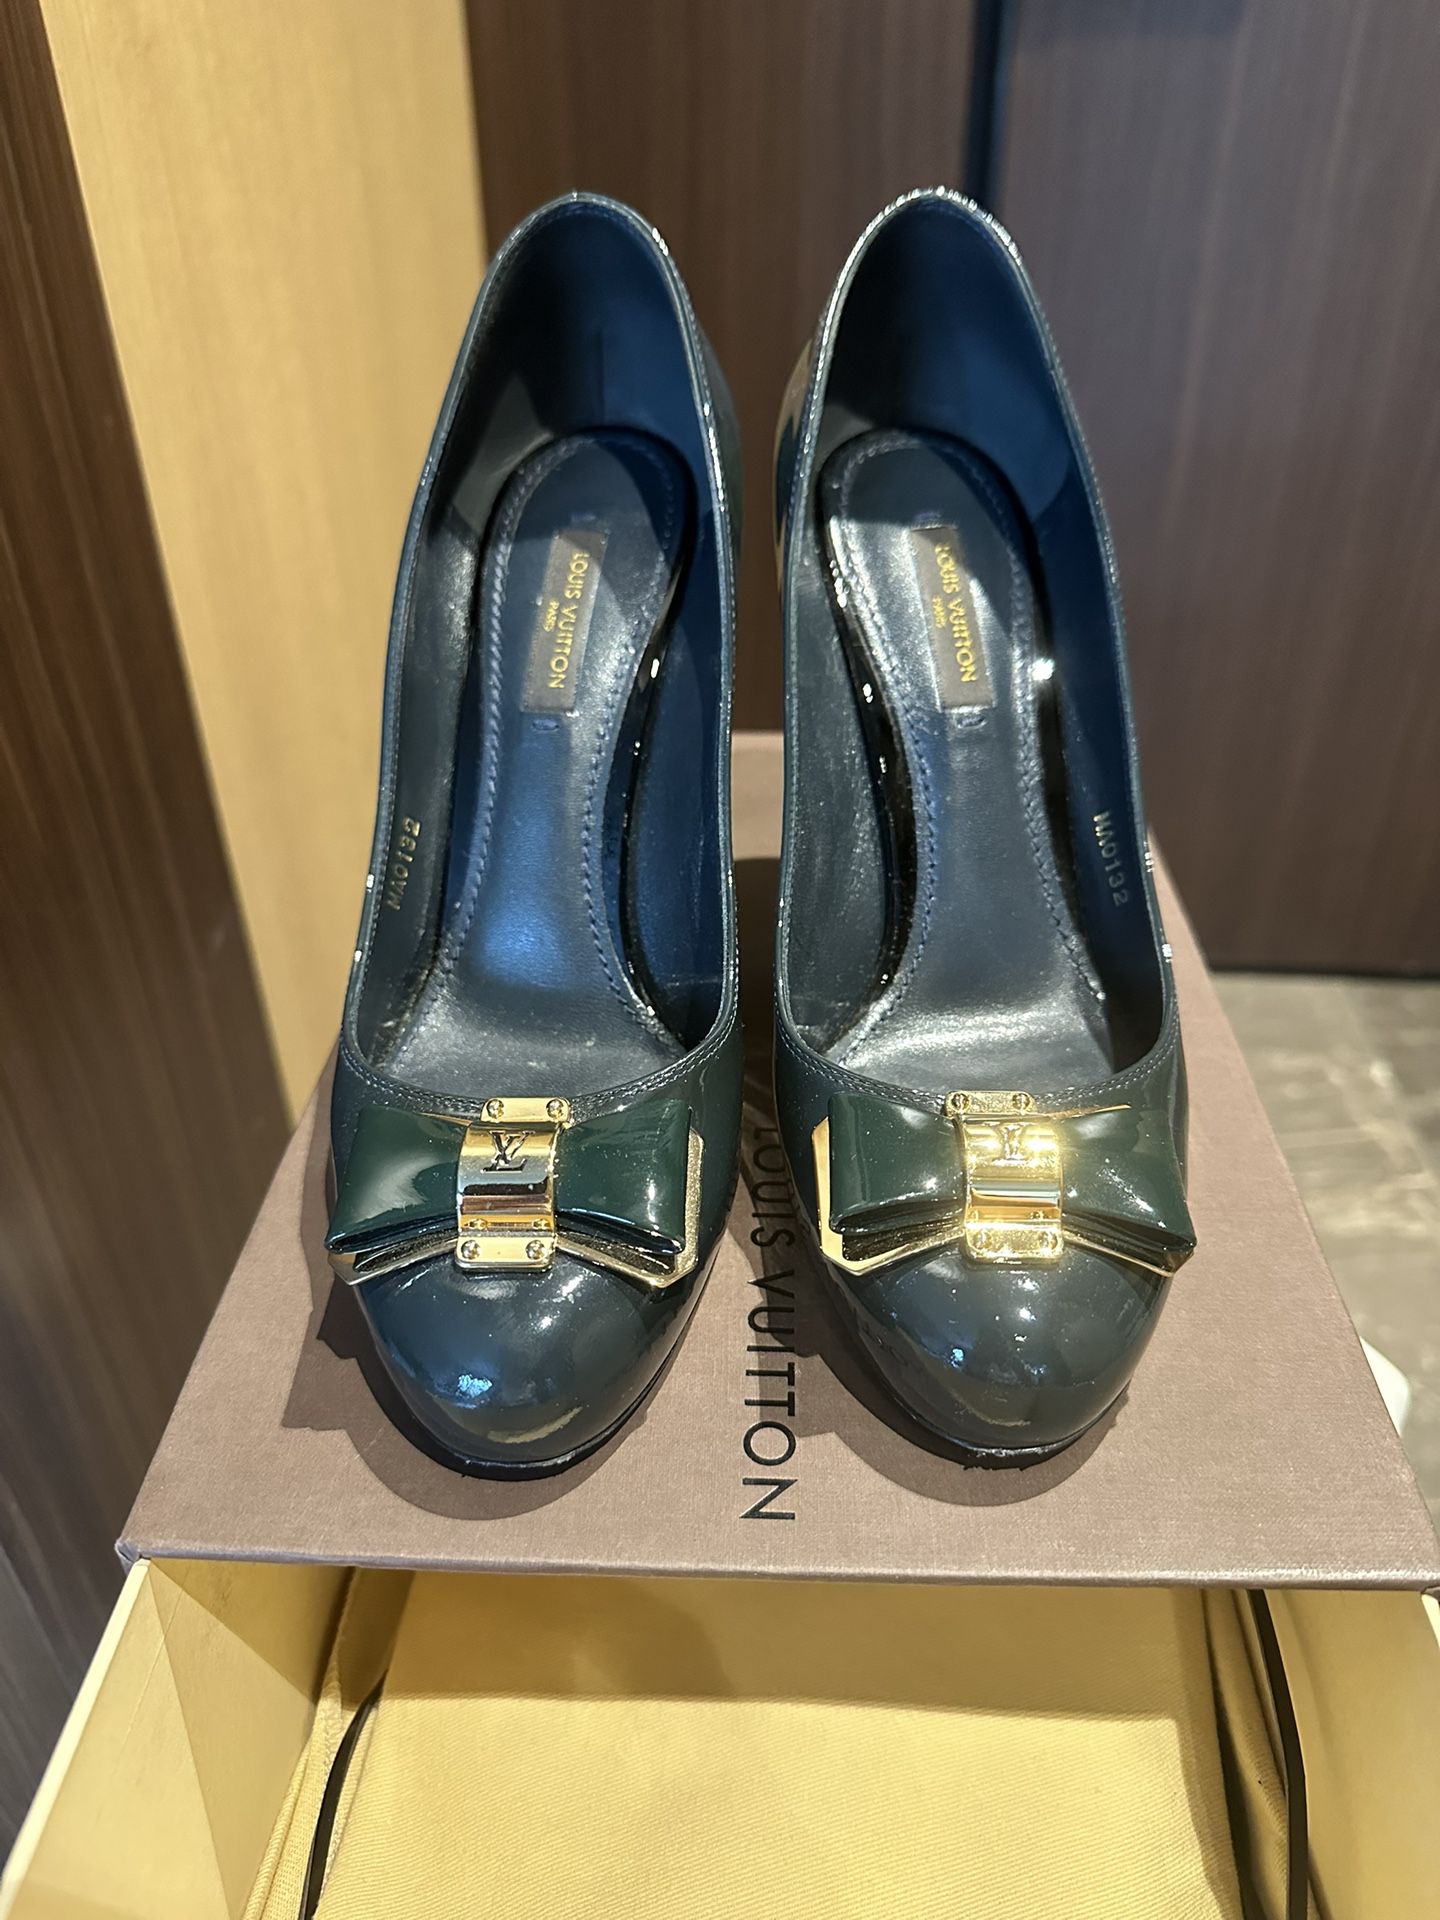 Lv Shoes for Sale in Shelby Township, MI - OfferUp